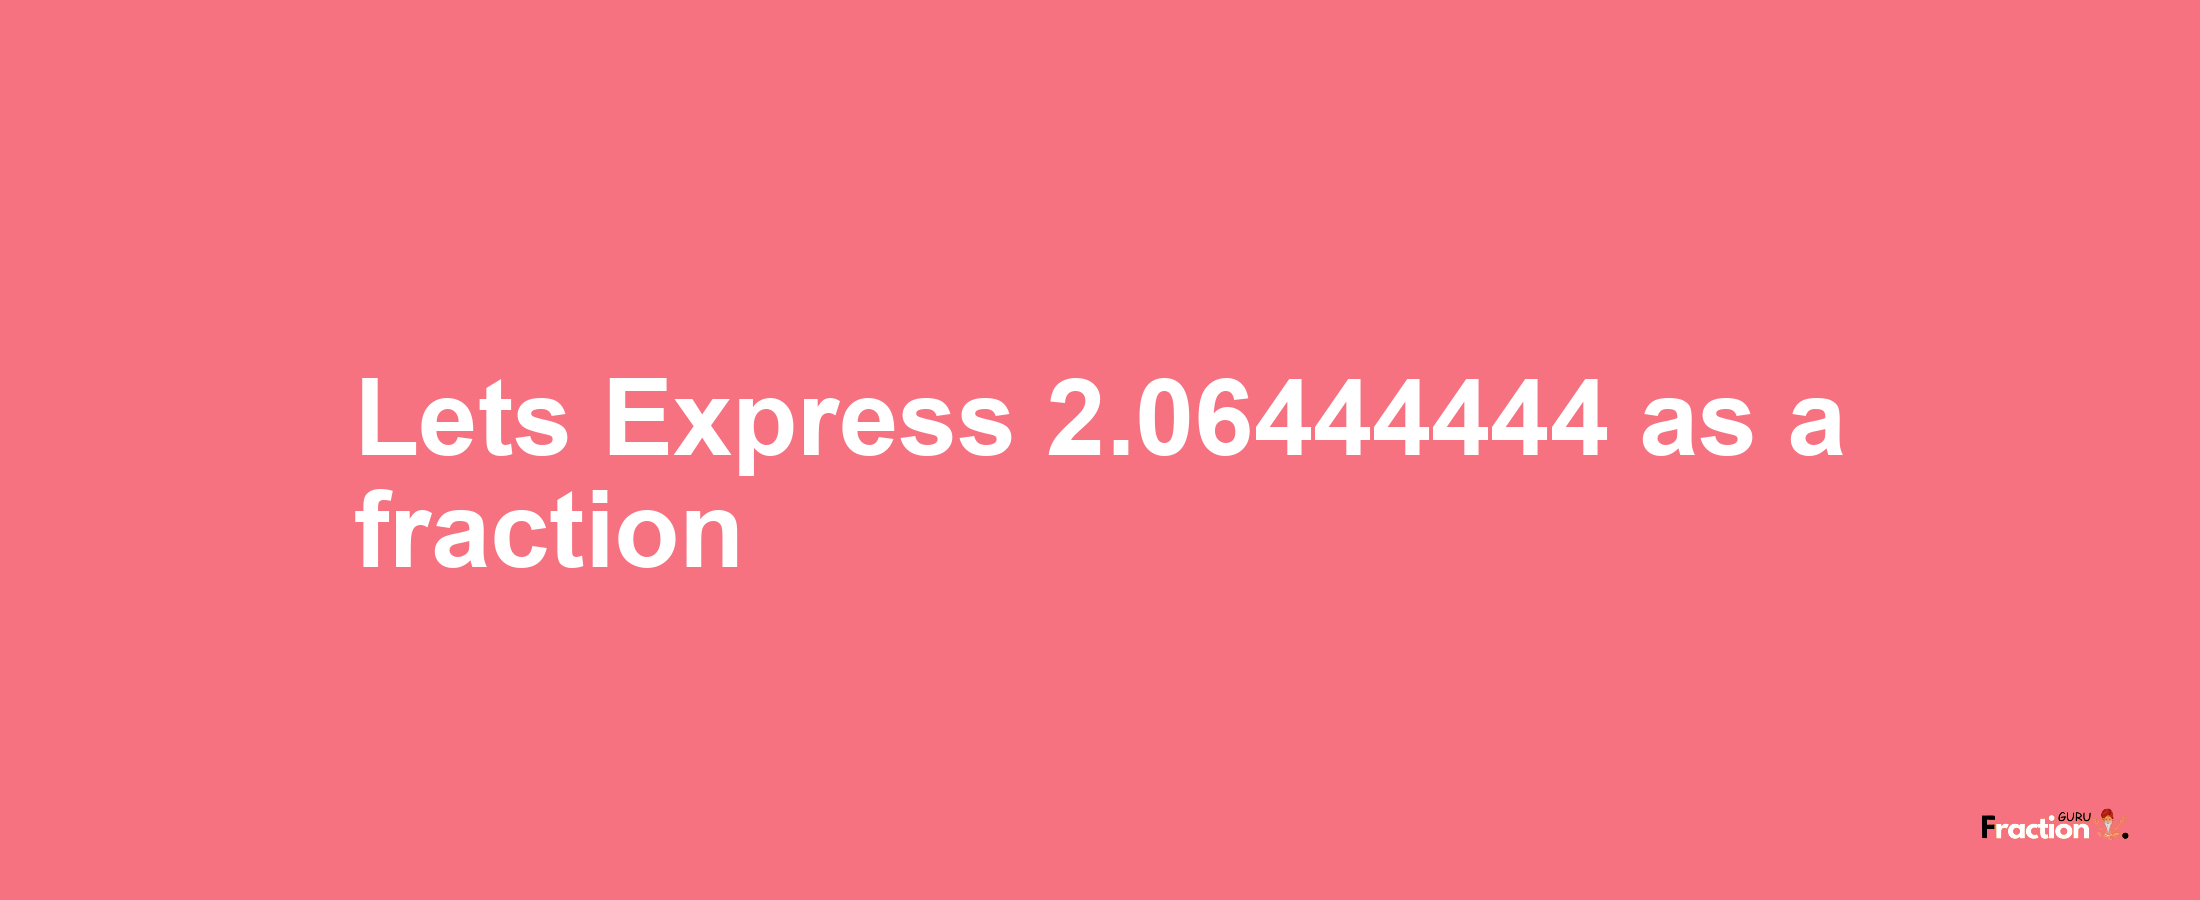 Lets Express 2.06444444 as afraction